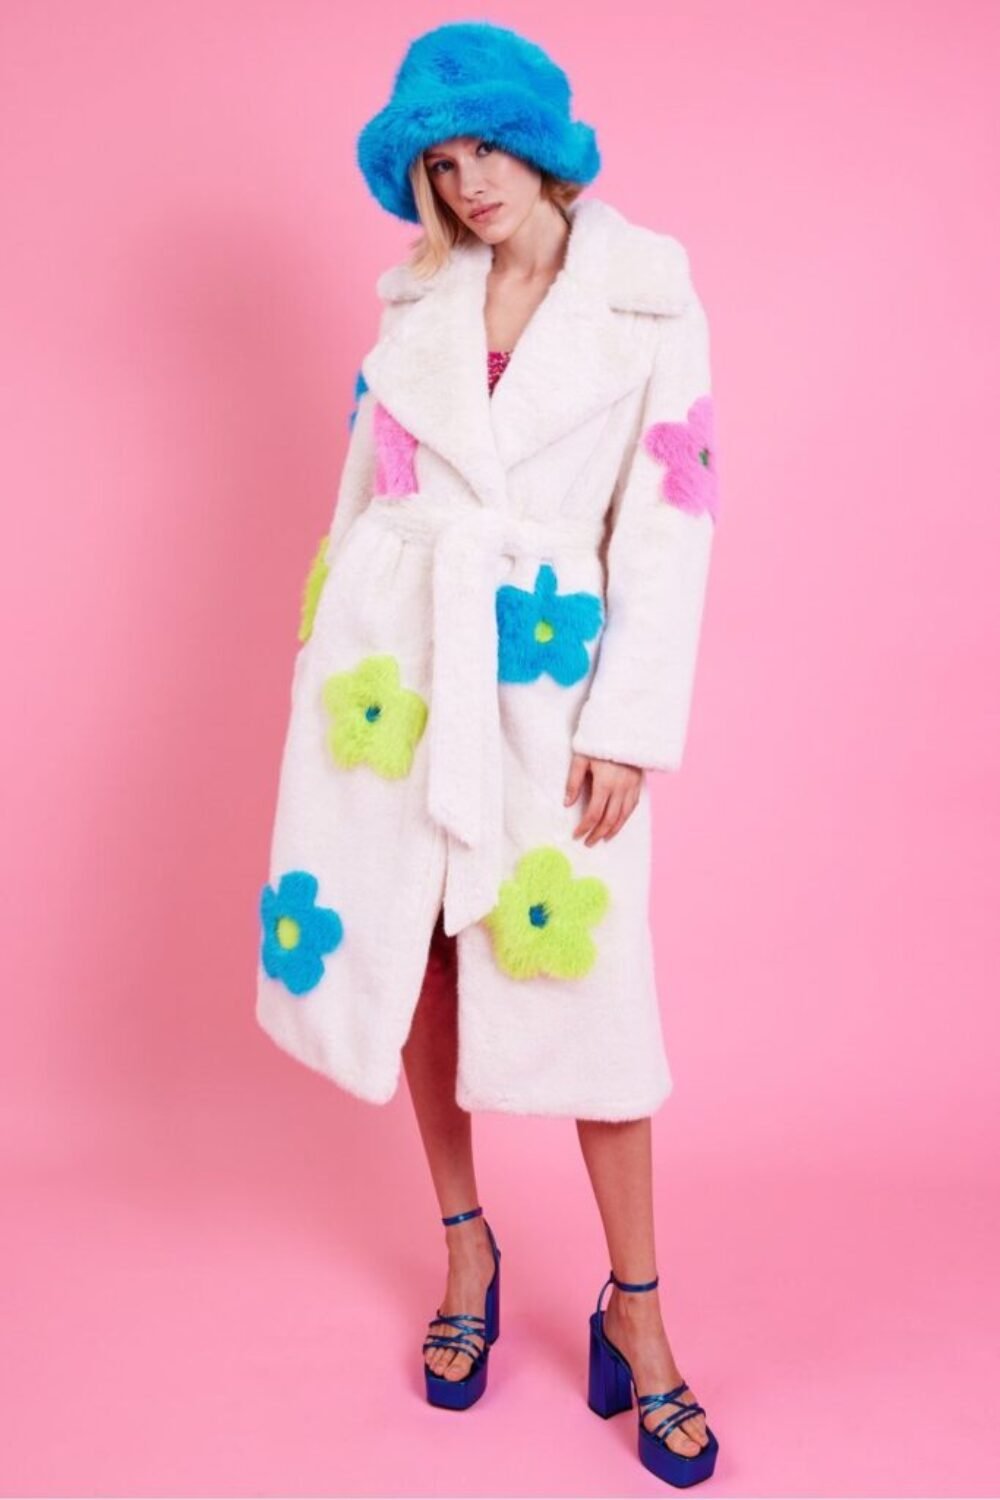 Shop Lux Eco Bamboo Faux Fur Coat with Bright Flower Detailing and women's luxury and designer clothes at www.lux-apparel.co.uk